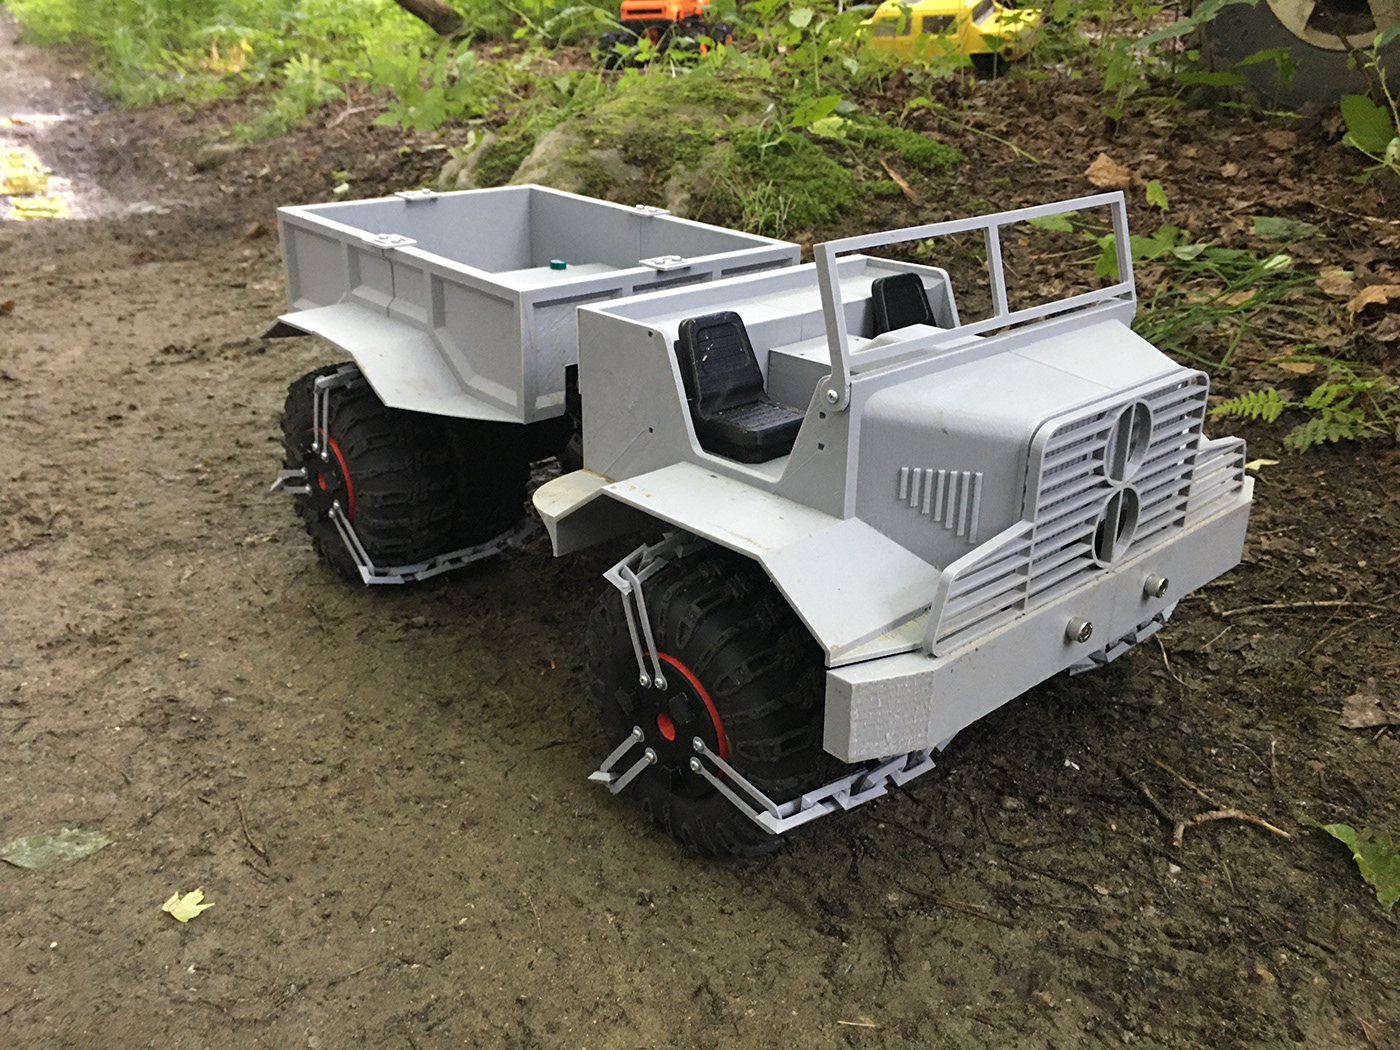 3d modeling 3d printing cad Solidworks 4x4 home made TT90